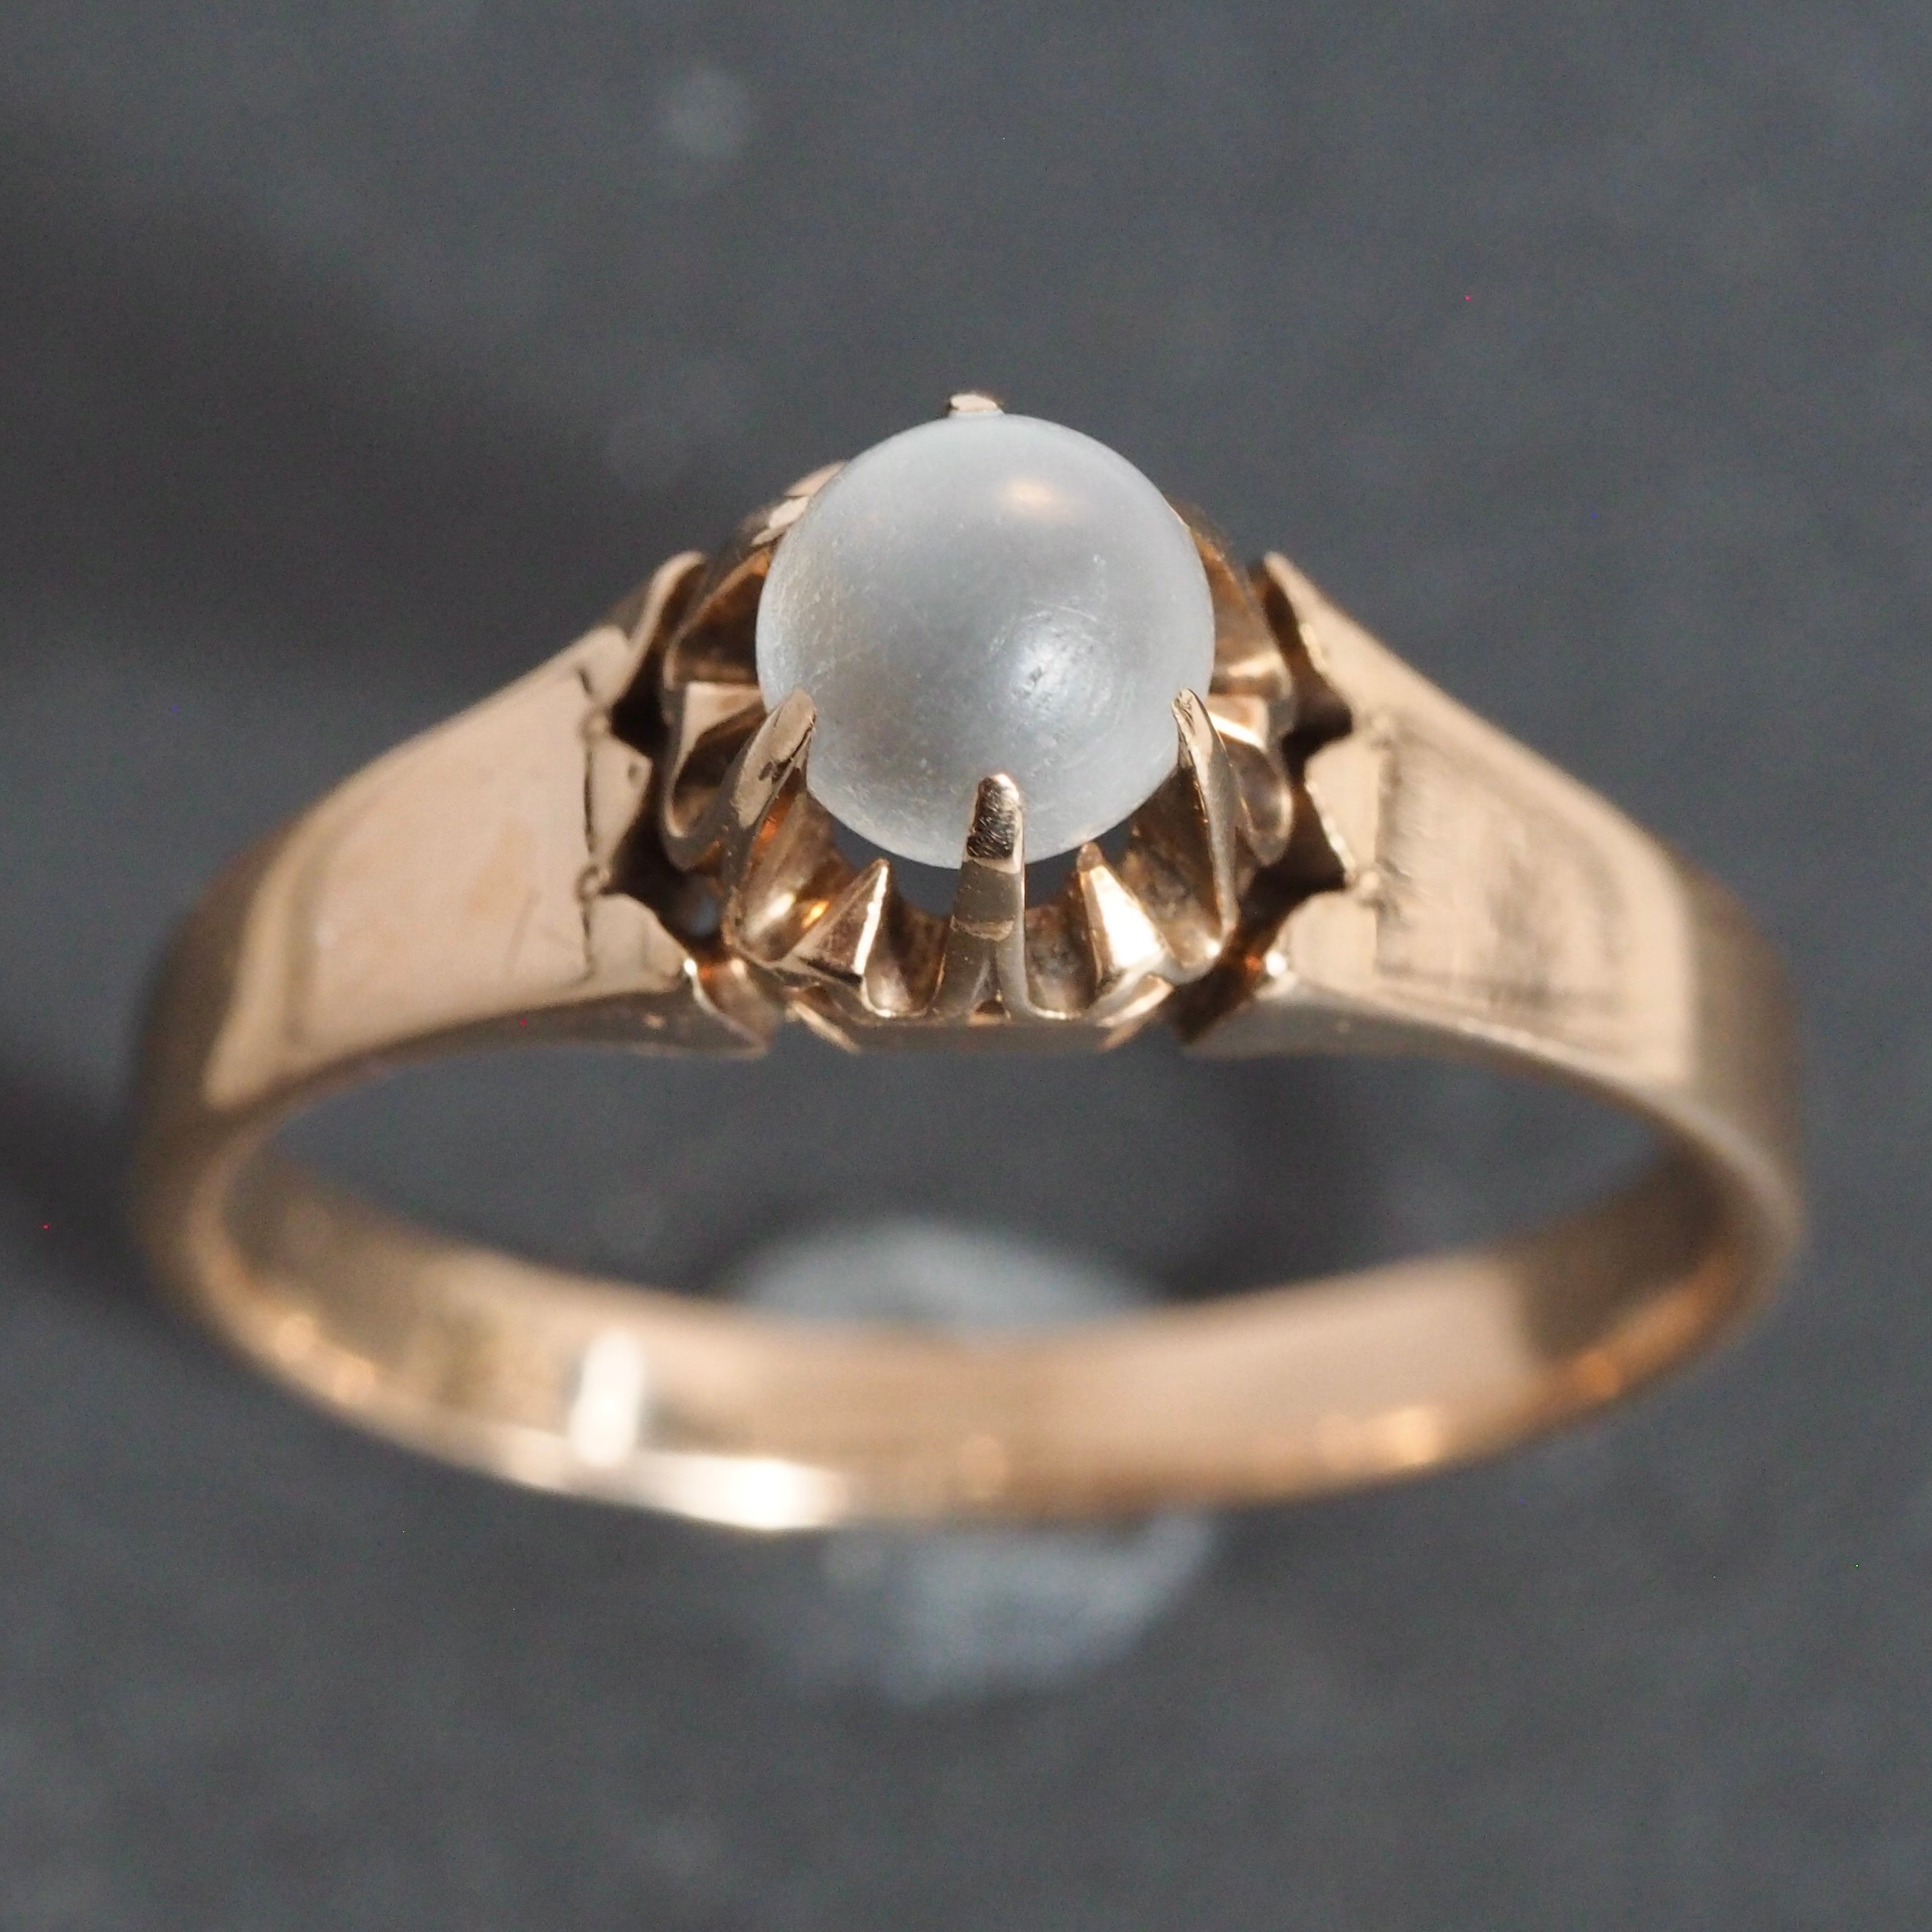 Antique Victorian 14k Gold Moonstone Solitaire Ring